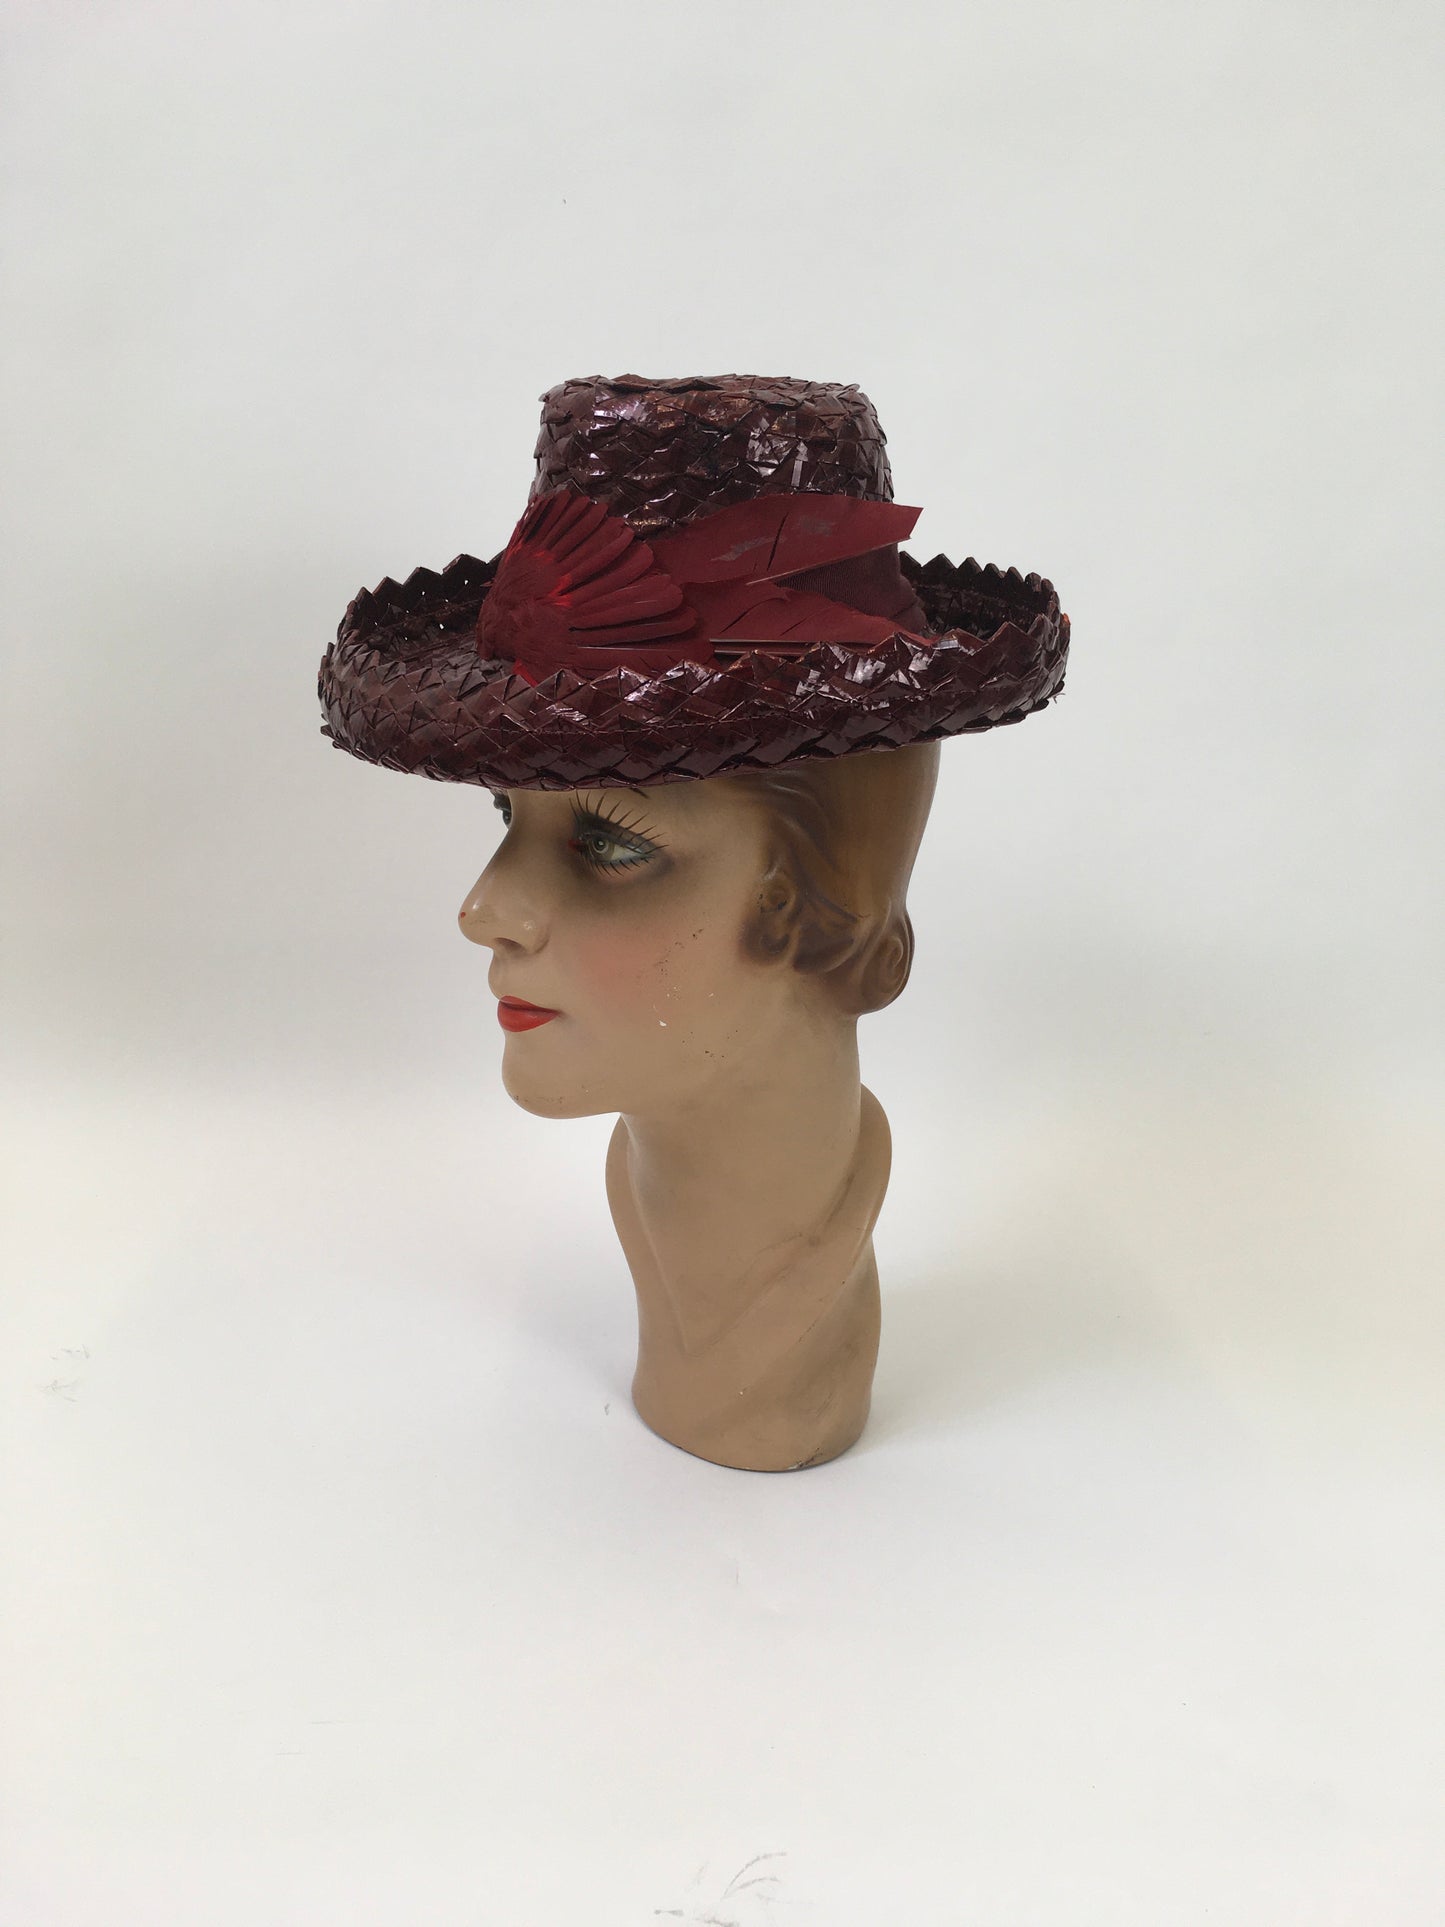 Original 1940's Sensational Raffia Hat with Feather Adornment - In A Warm Red Wine